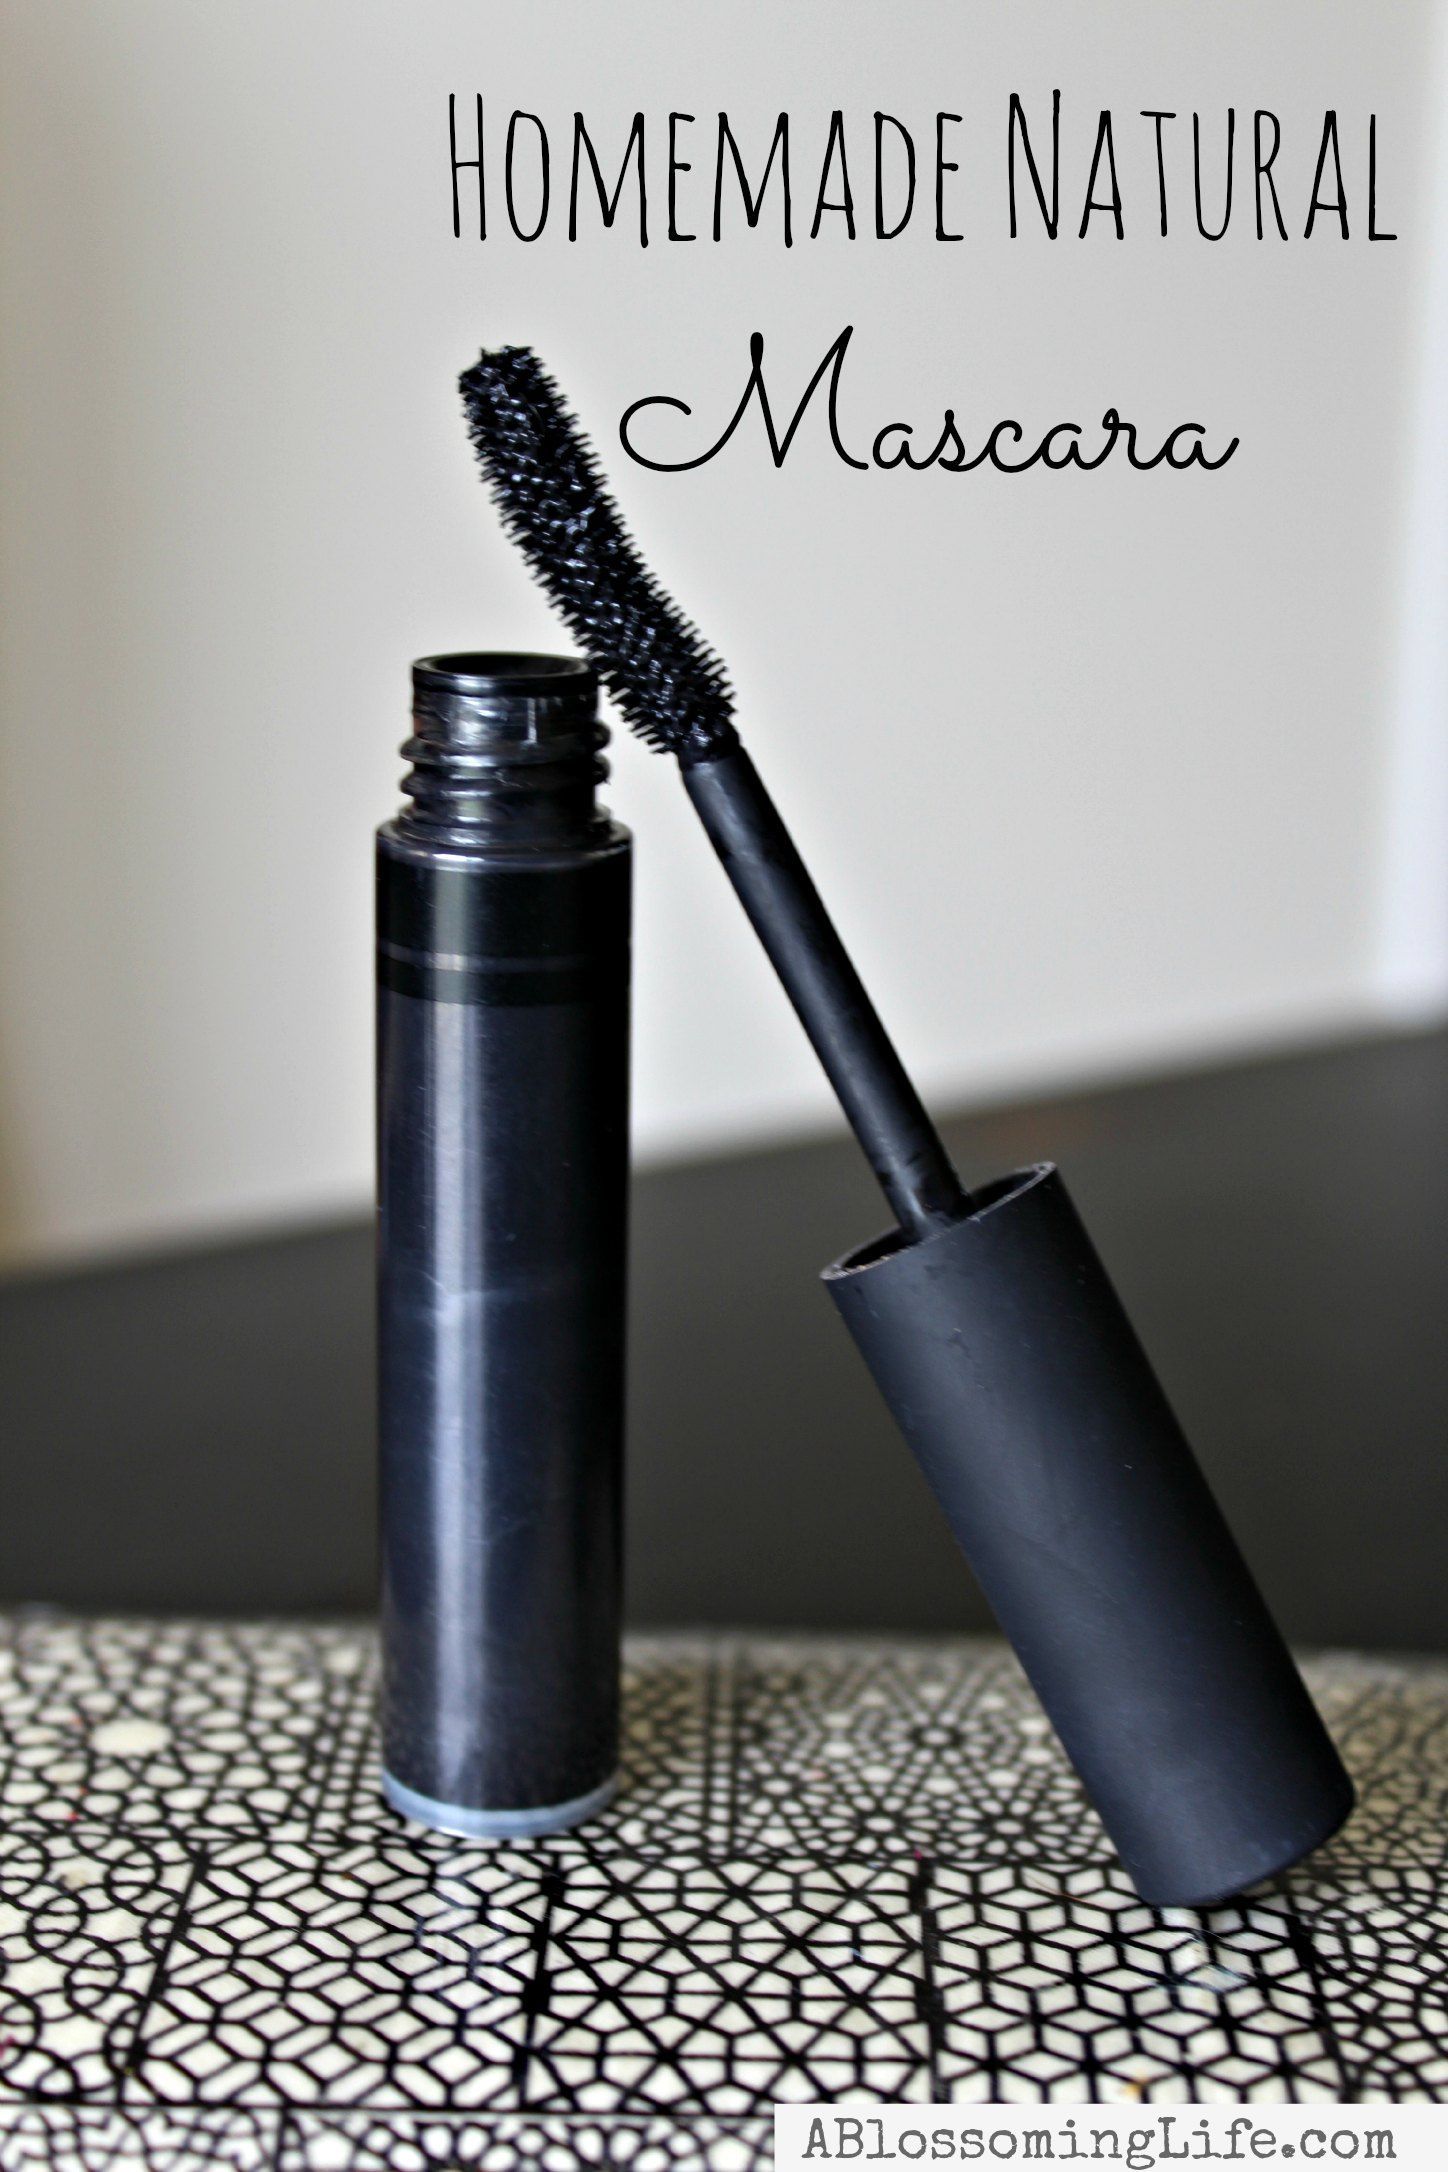 Homemade Natural Mascara. Did you know you can make your own mascara, naturally? You can!! This stuff is great. It moisturizes